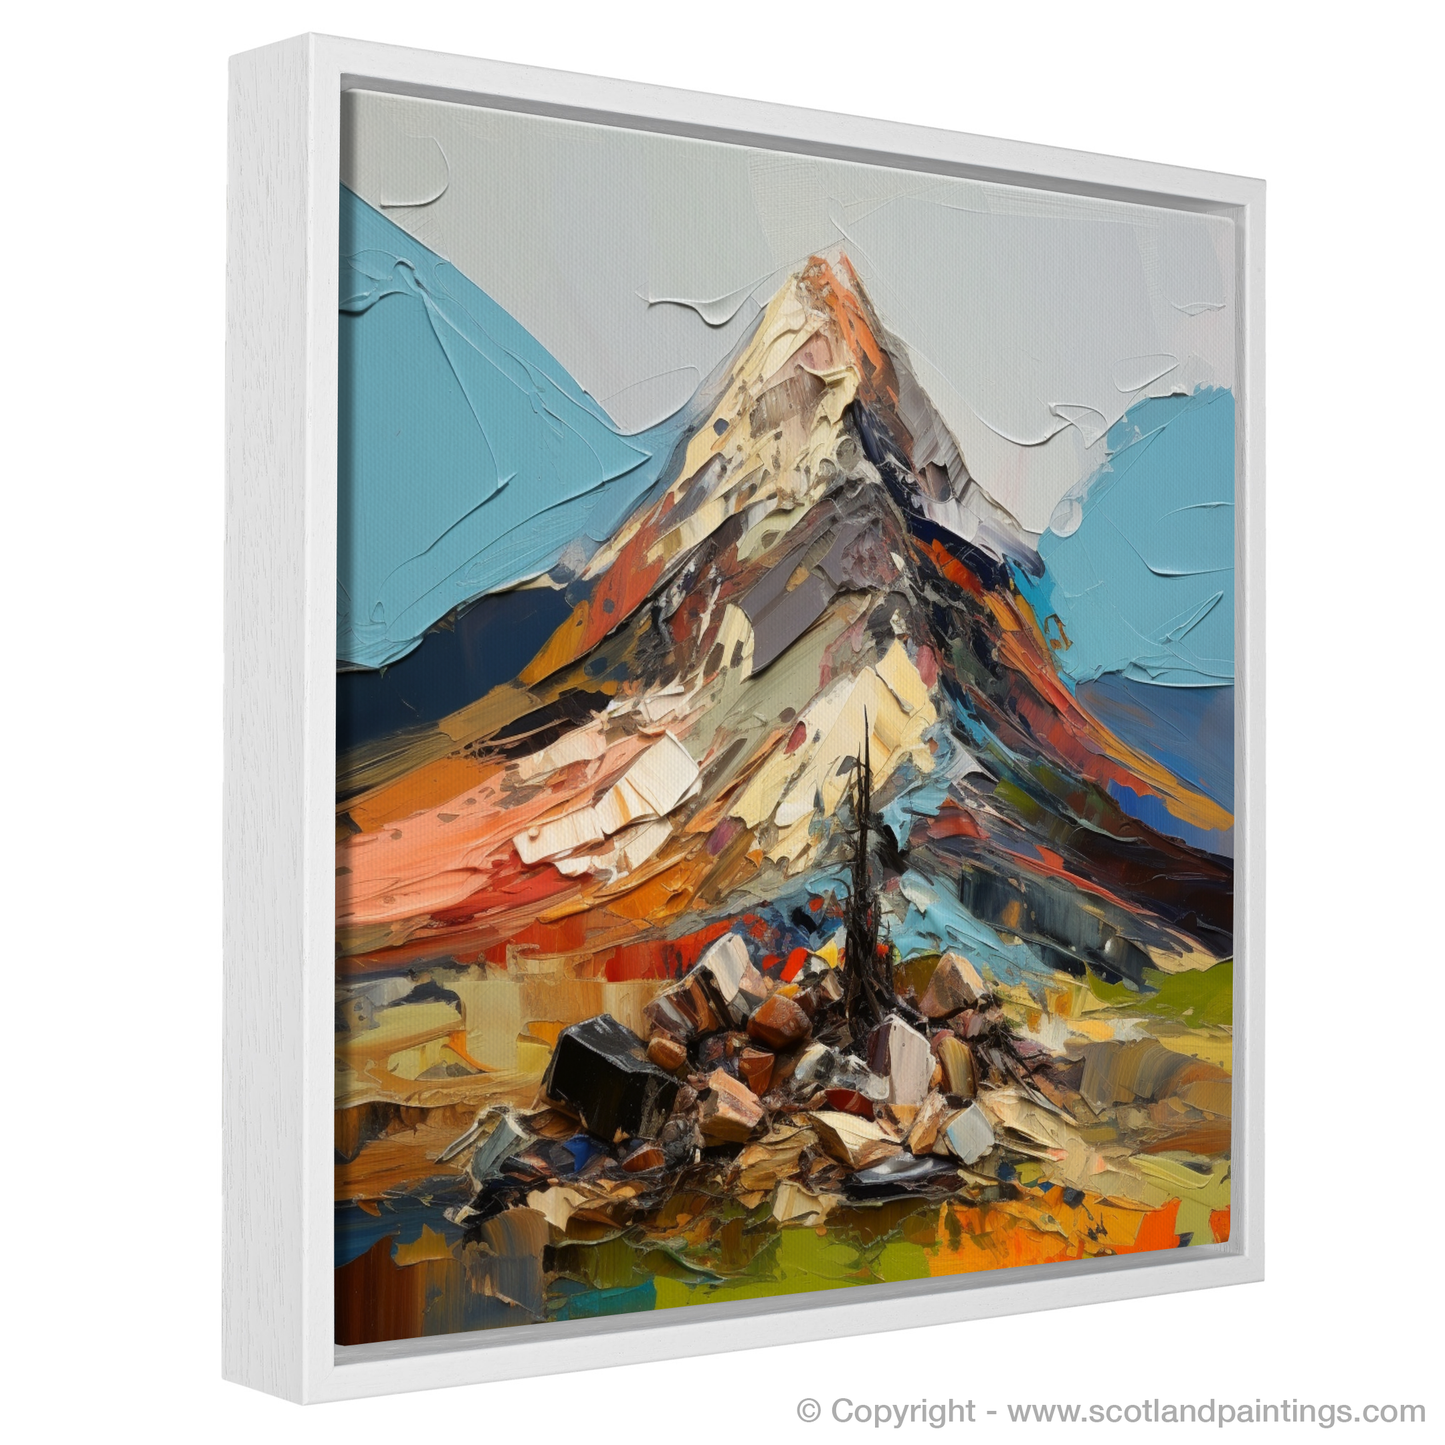 Painting and Art Print of Cairn Gorm, Highlands entitled "Cairn Gorm Unleashed: An Expressionist Ode to the Highland Majesty".